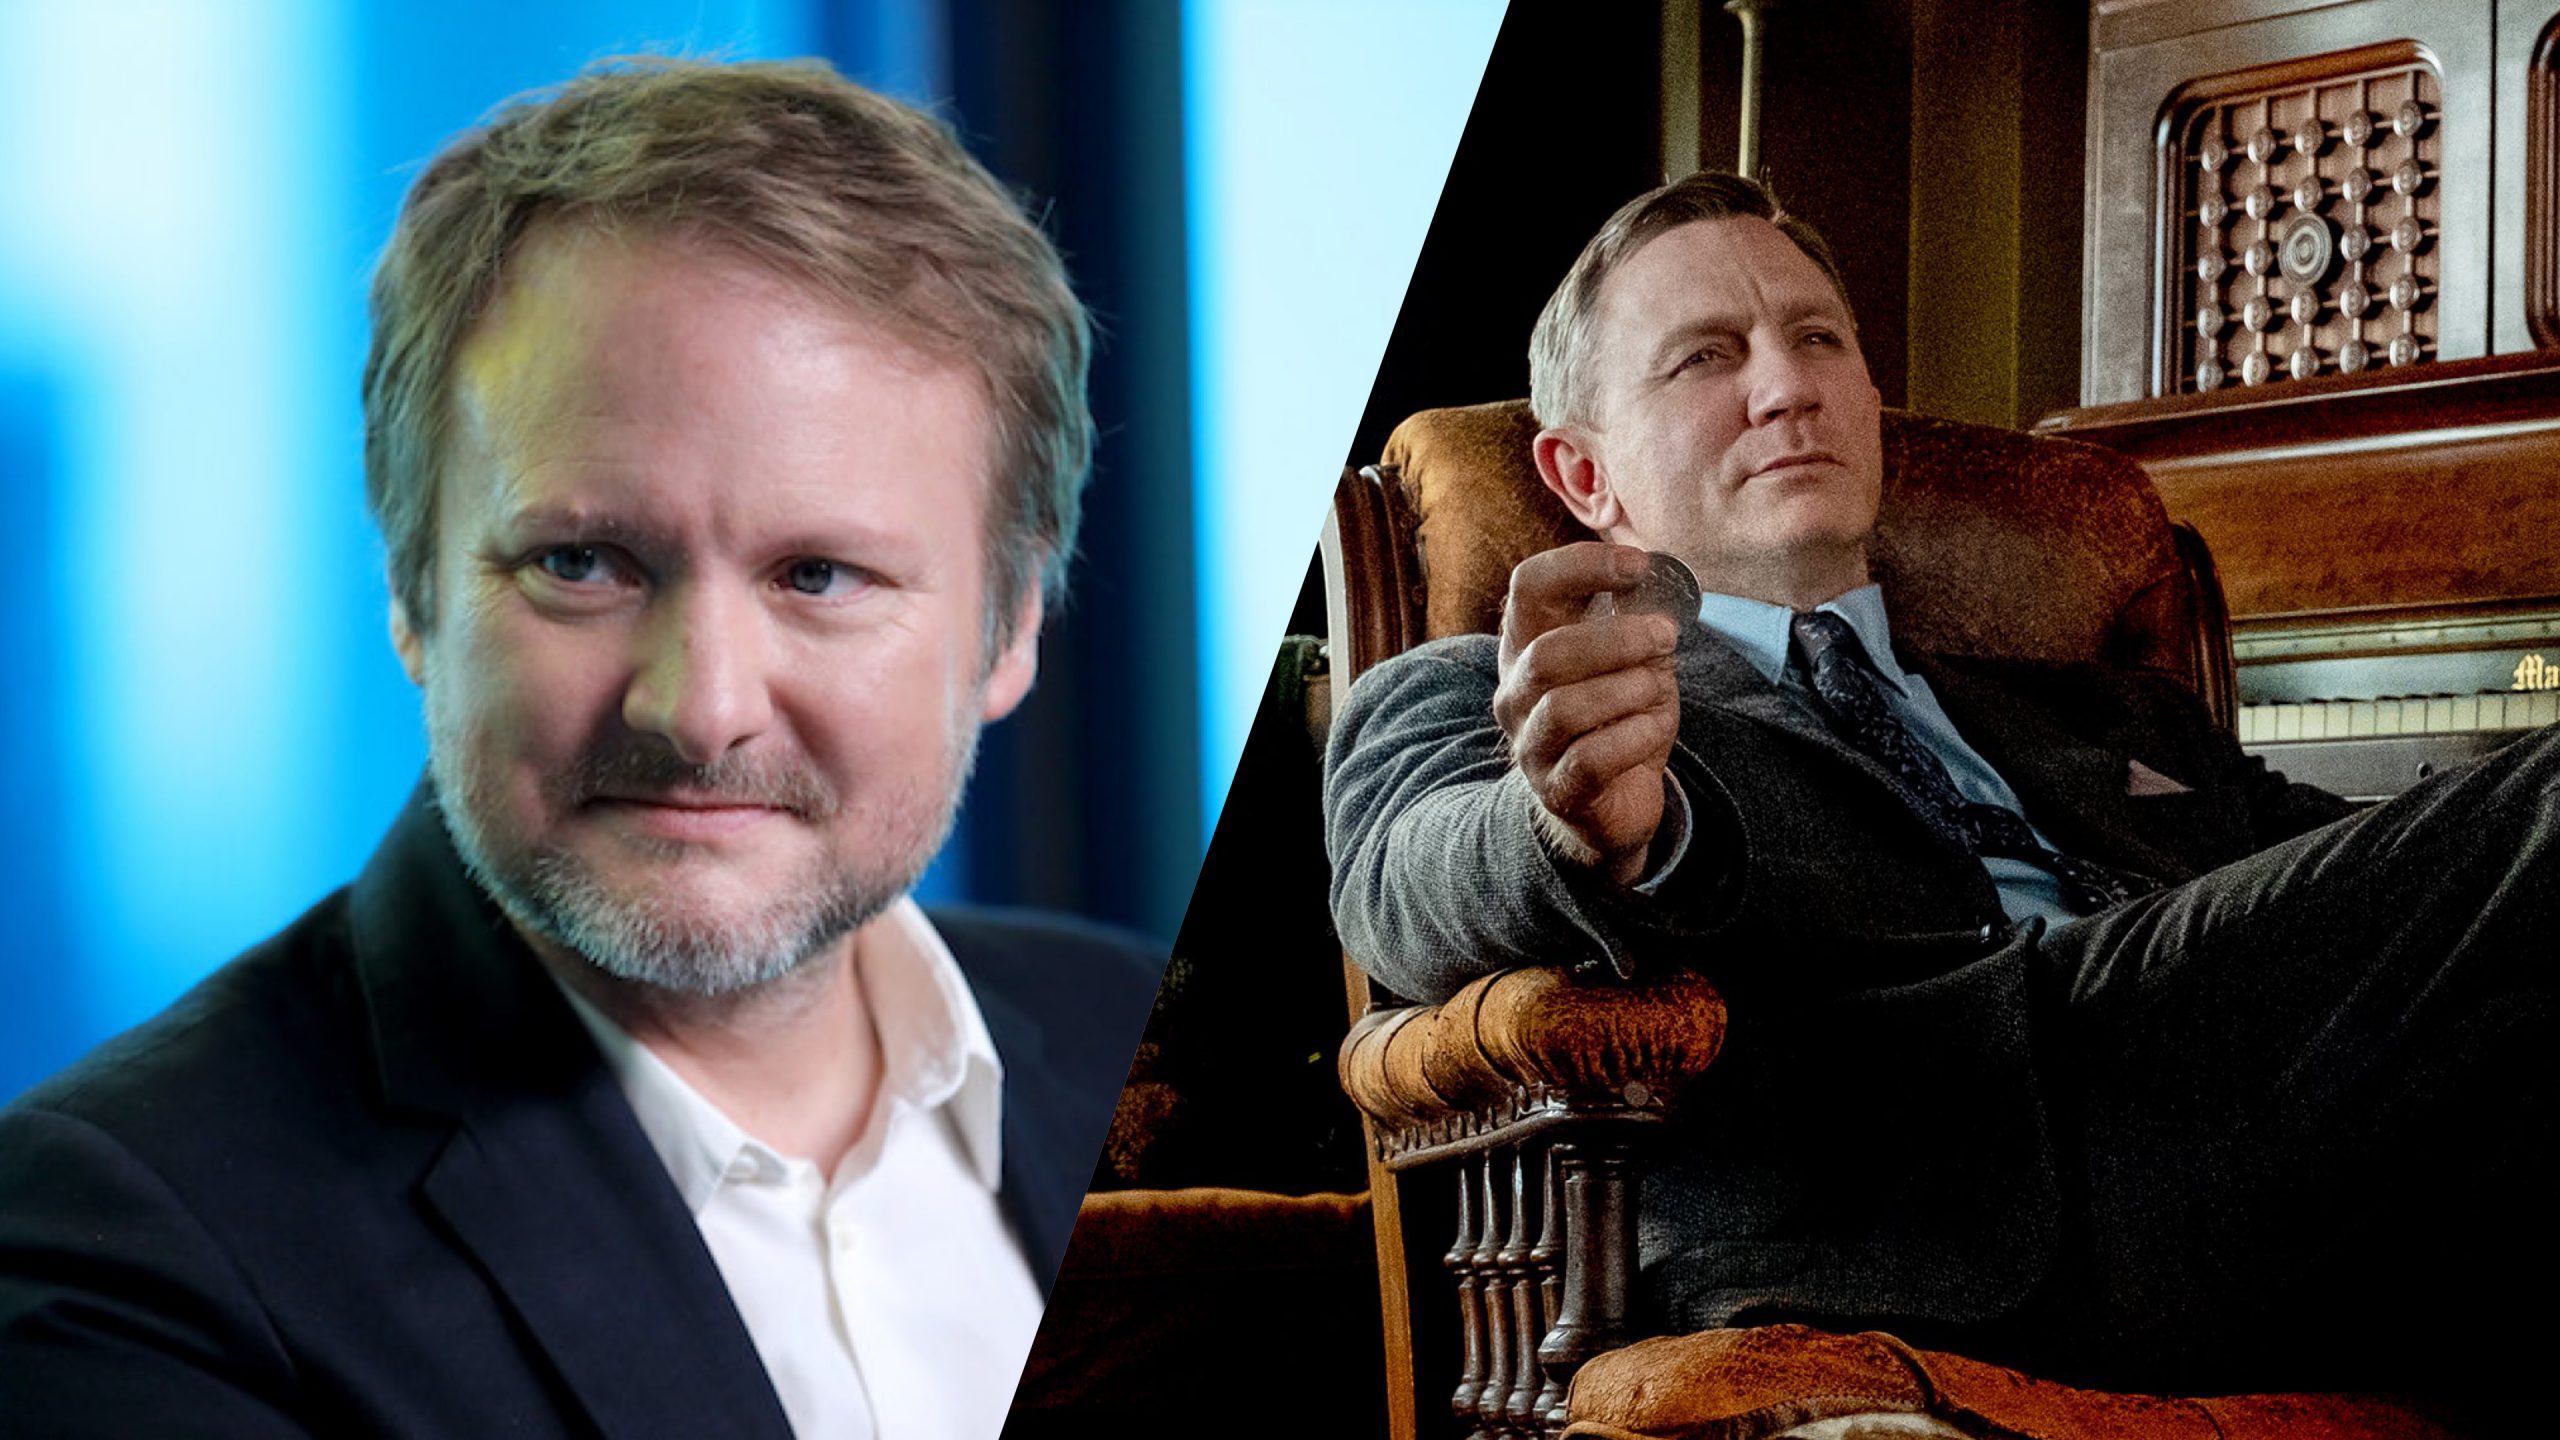 Rian Johnson's Star Wars Trilogy May Not Happen Anymore 